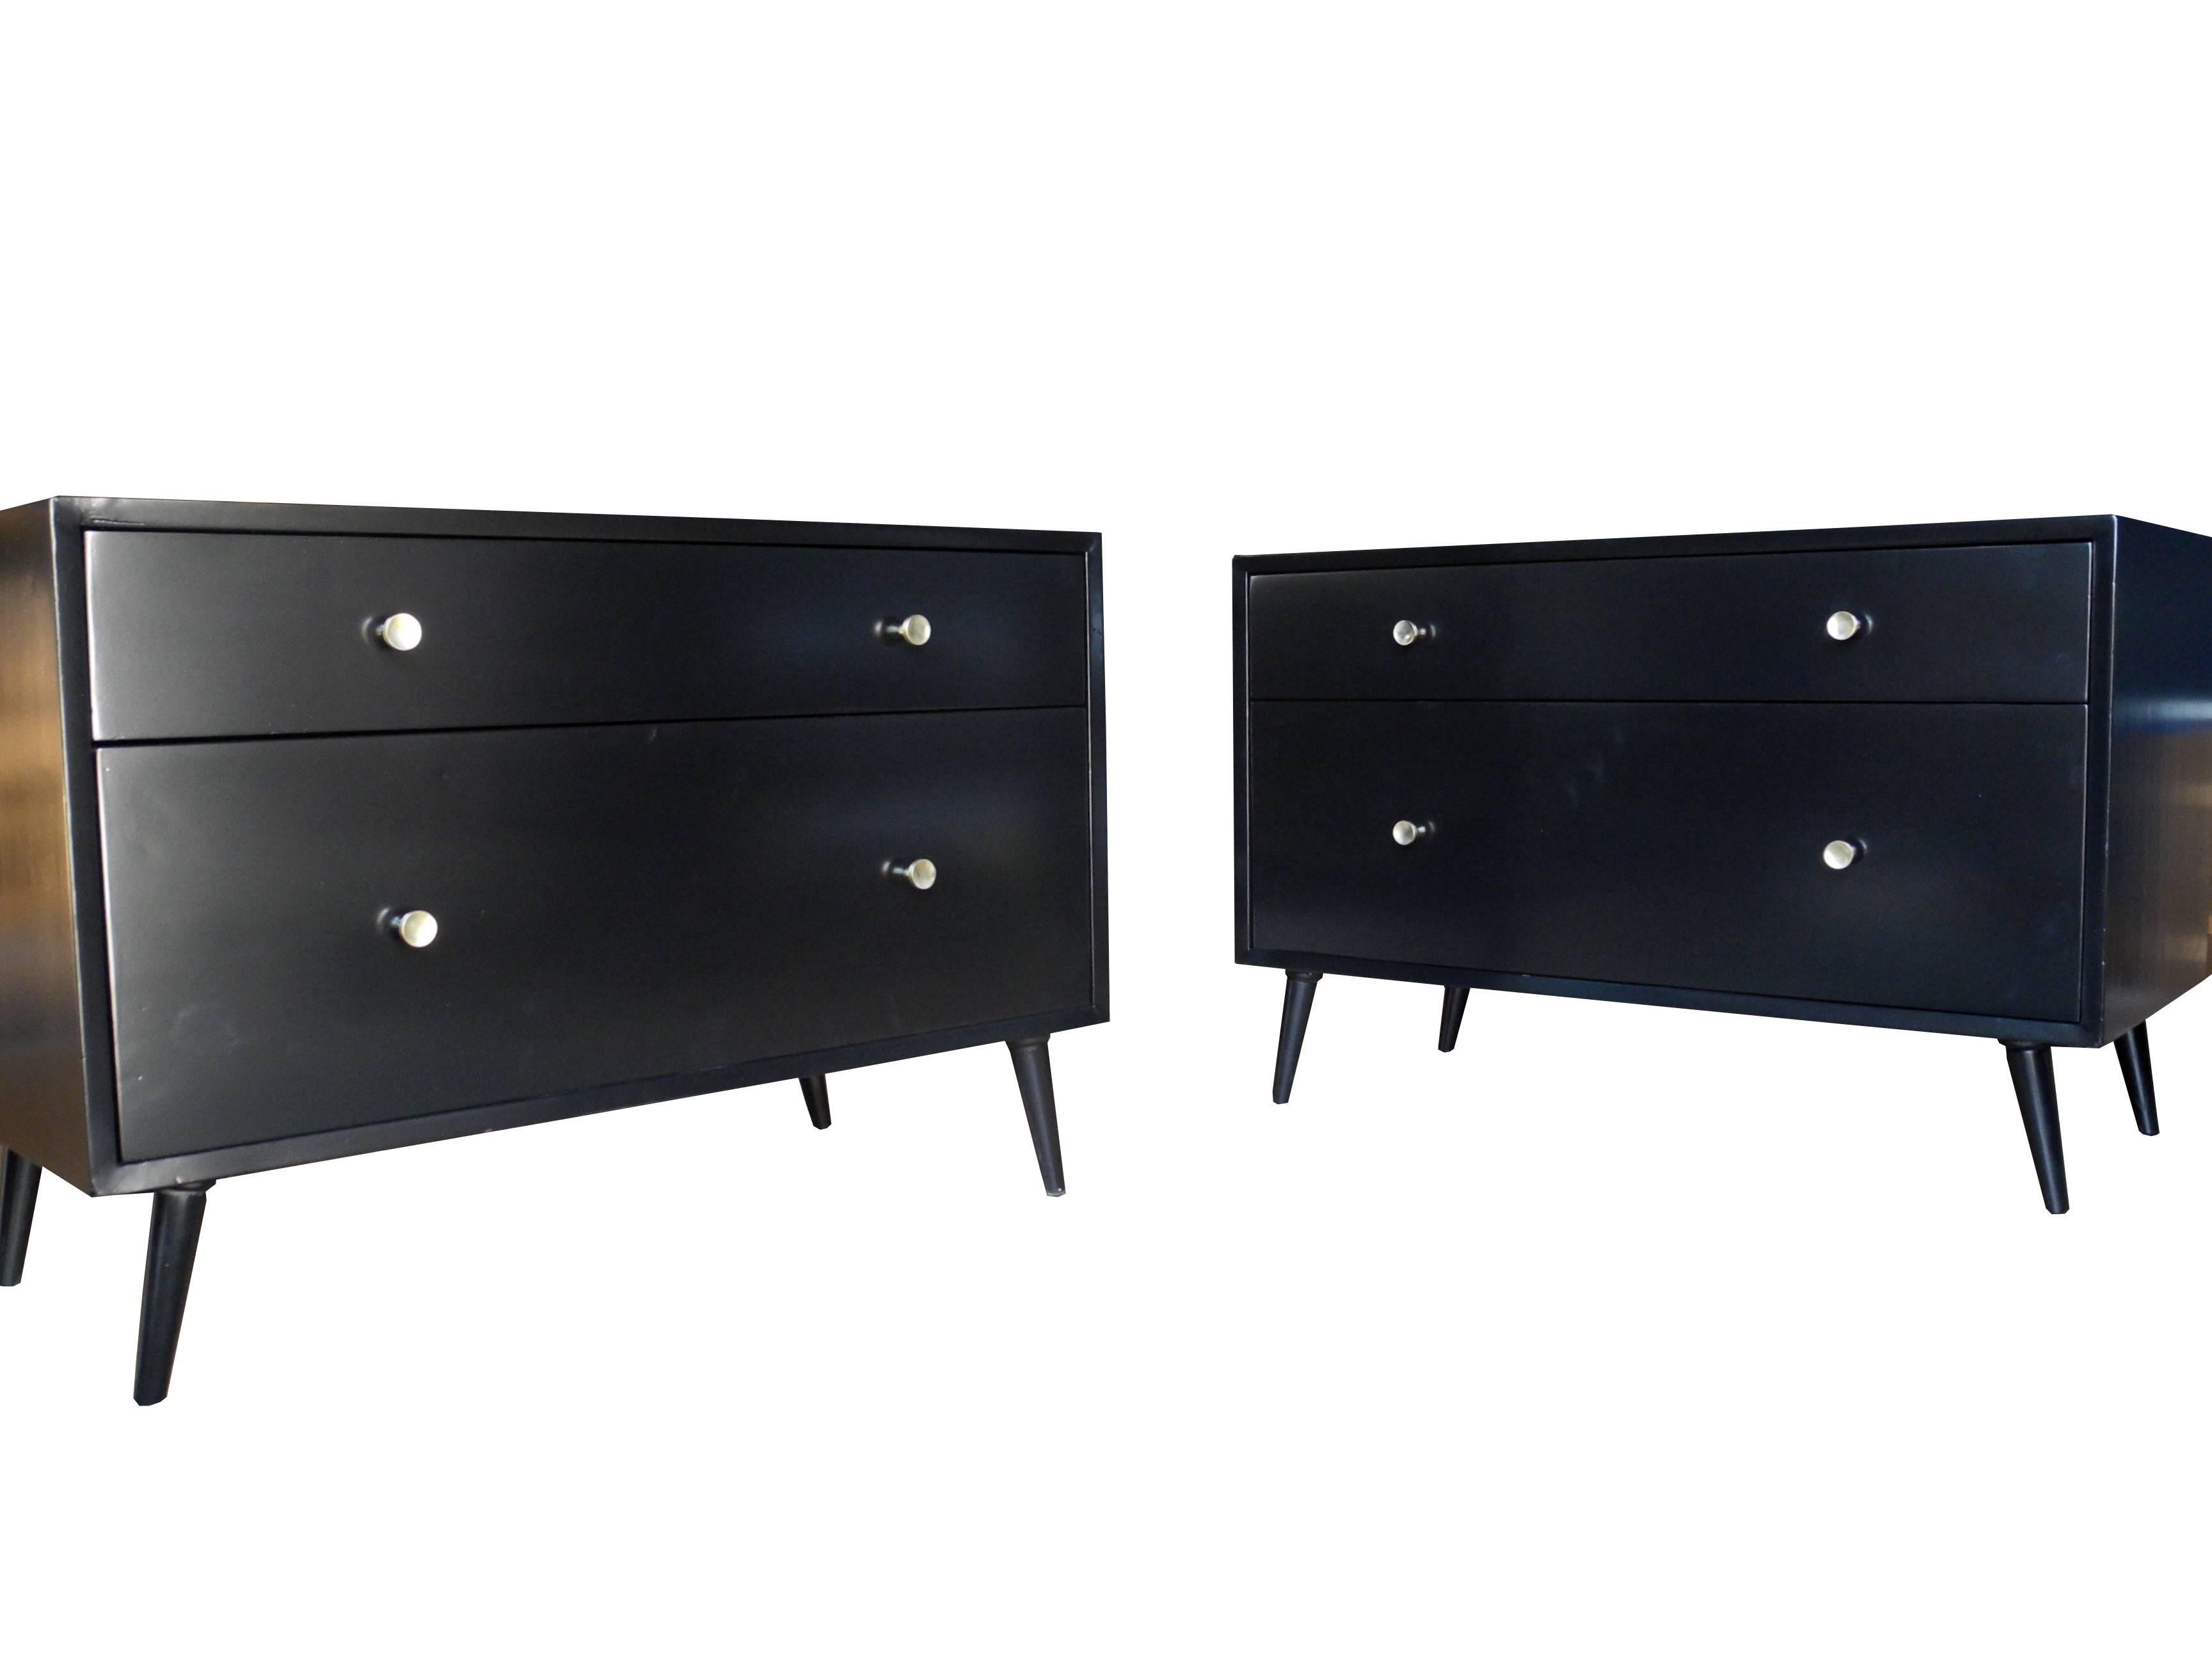 These vintage nightstands or small dressers were designed by Morris Sanders for Mengel Module. Made of painted black mahogany with oak interiors. Equipped with one deep drawer and one shorter drawer. Also available in white but with three drawers.